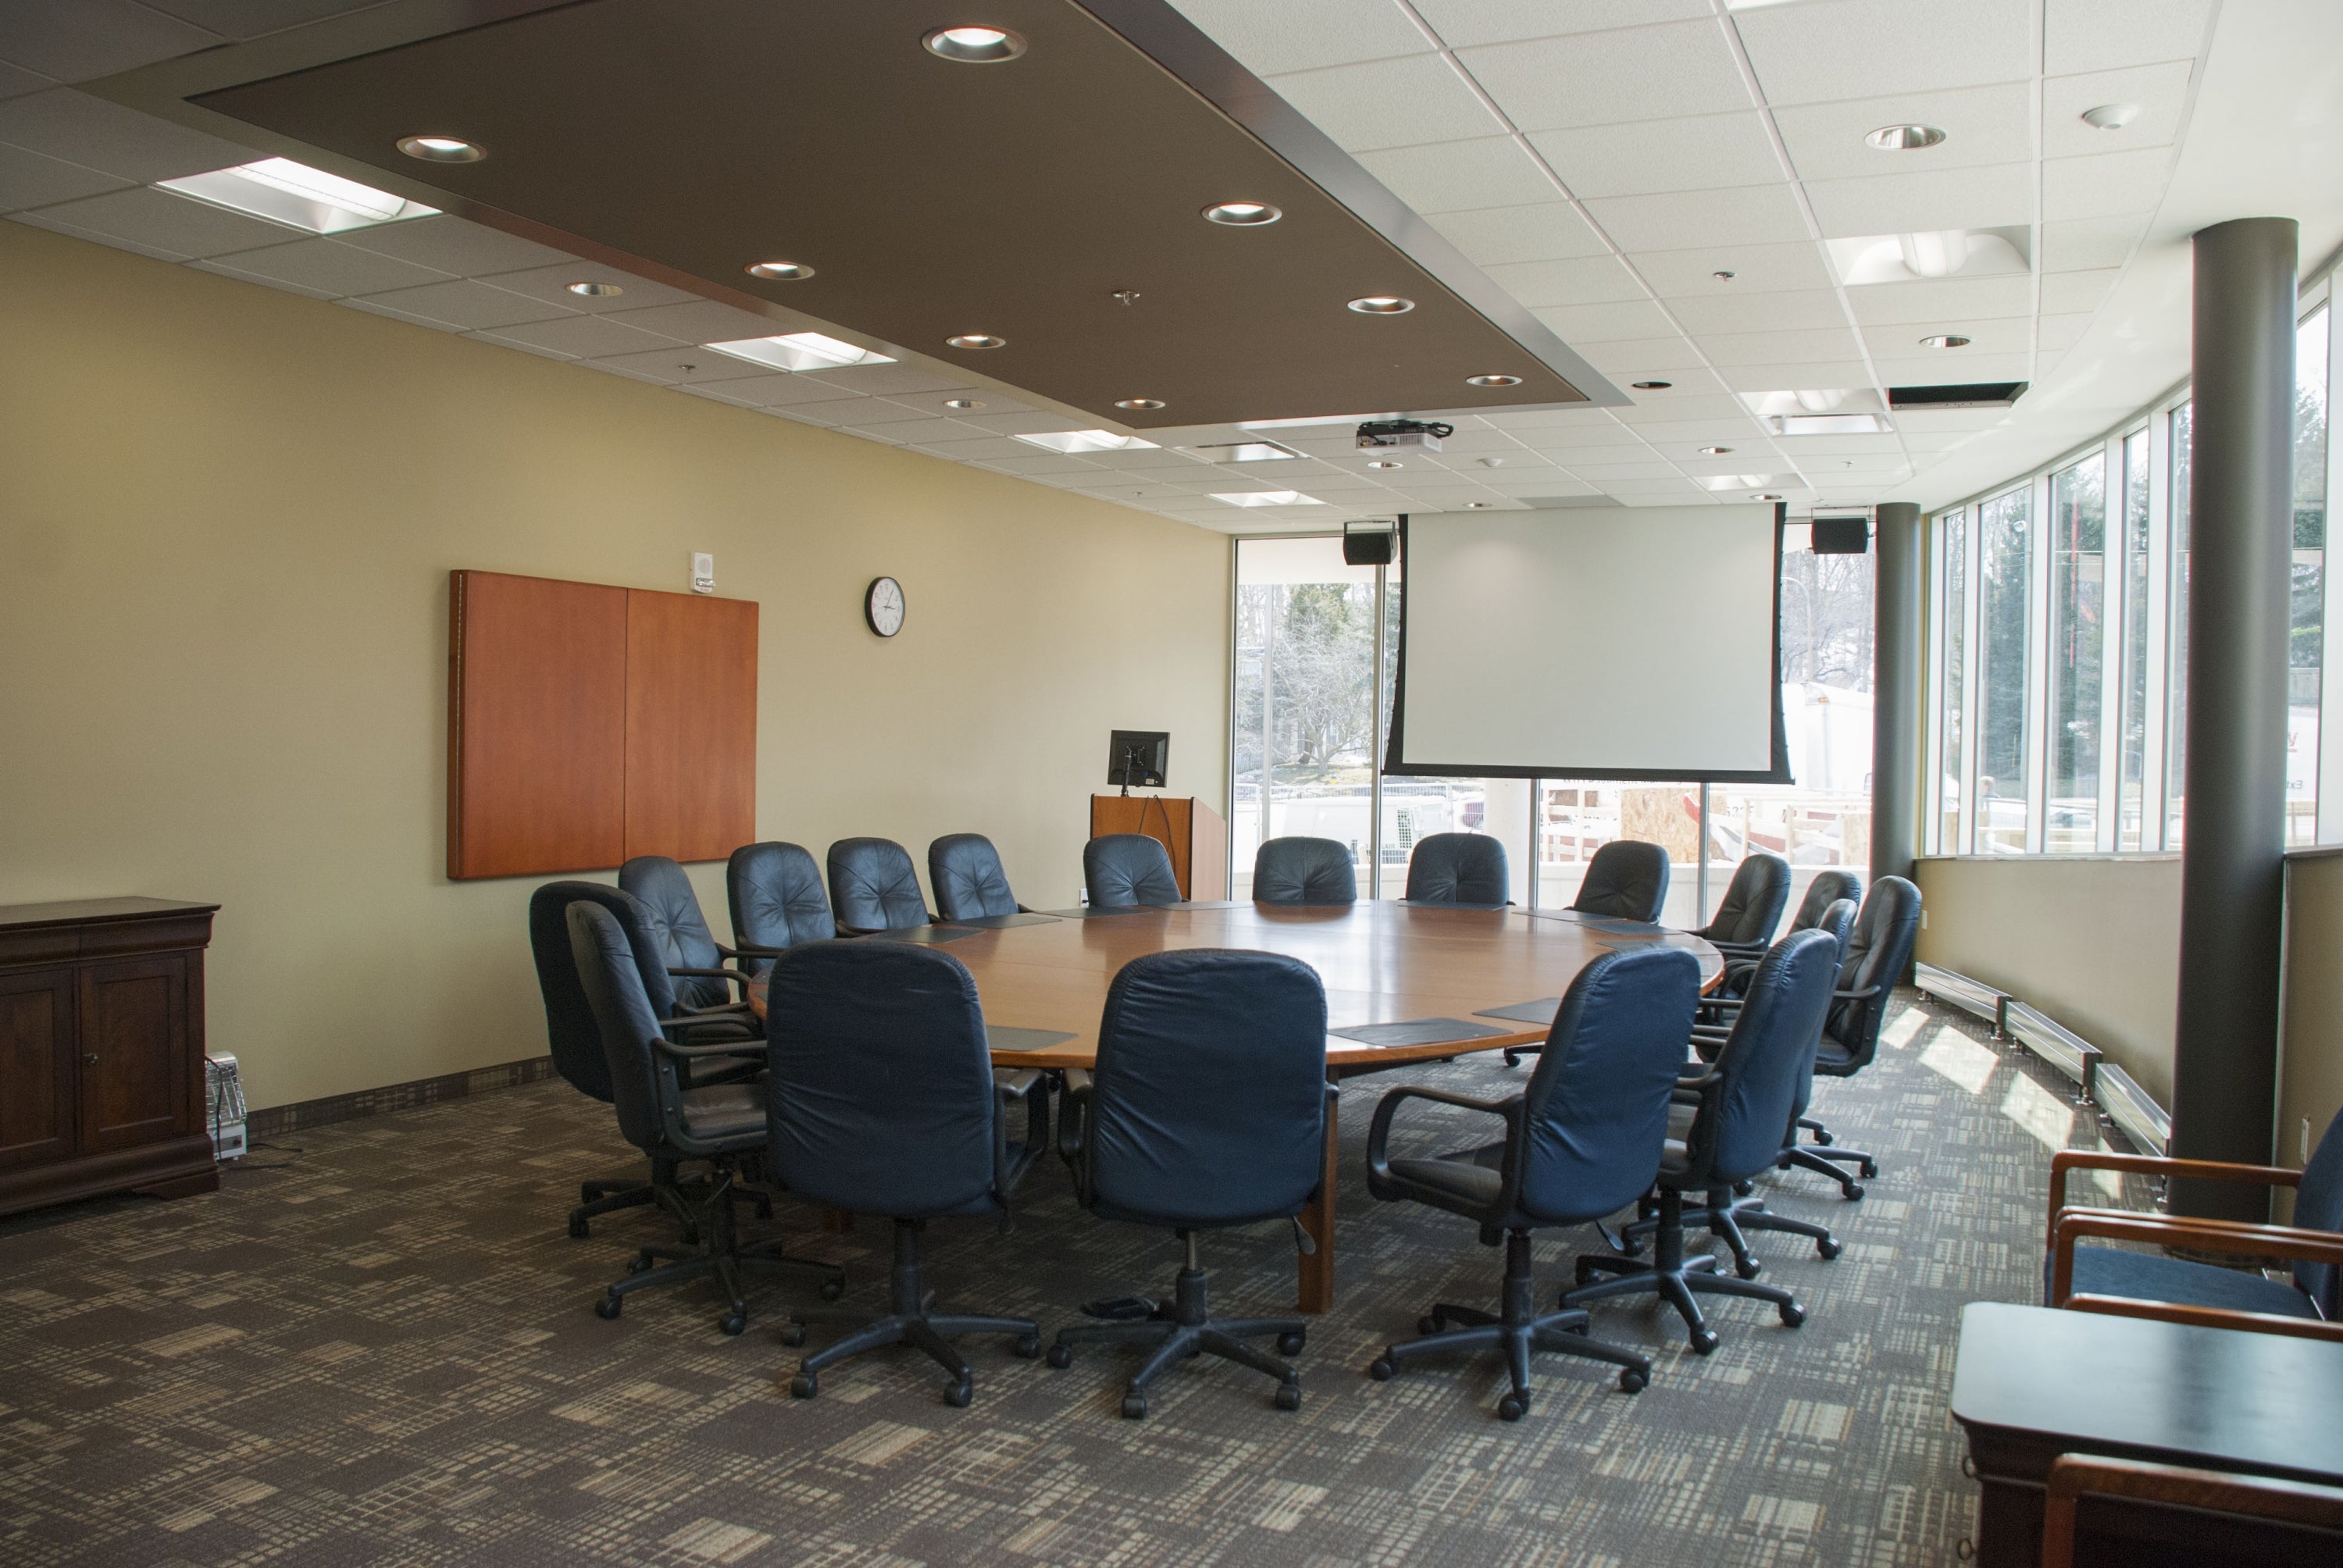 Large board room with wooden table, board chairs, a projector, and large windows